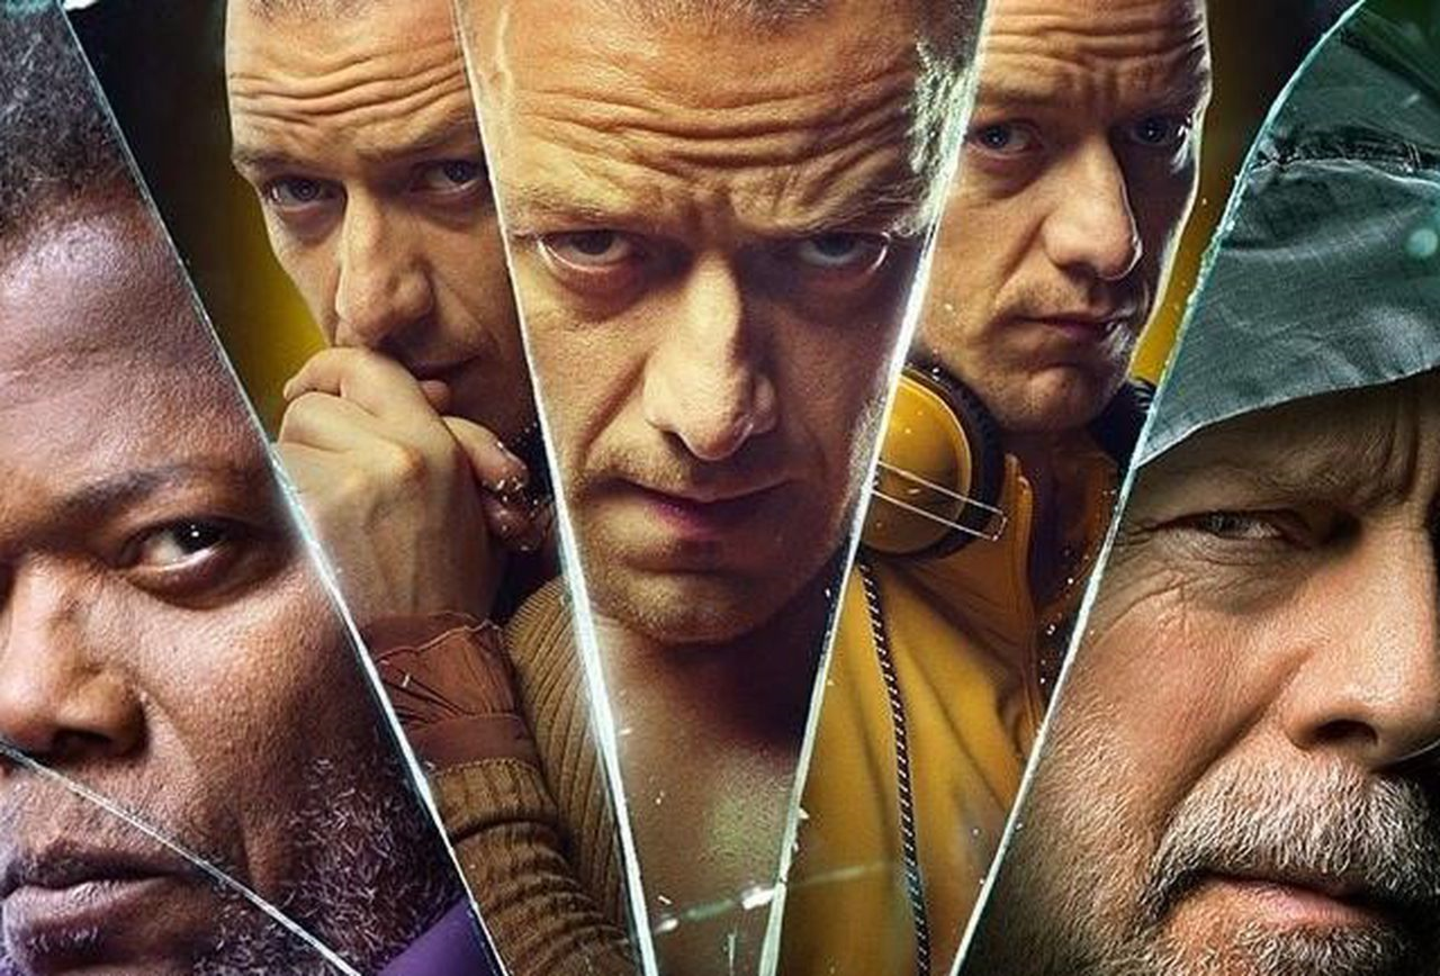 Although flawed, Glass is still an enjoyable film in many aspects